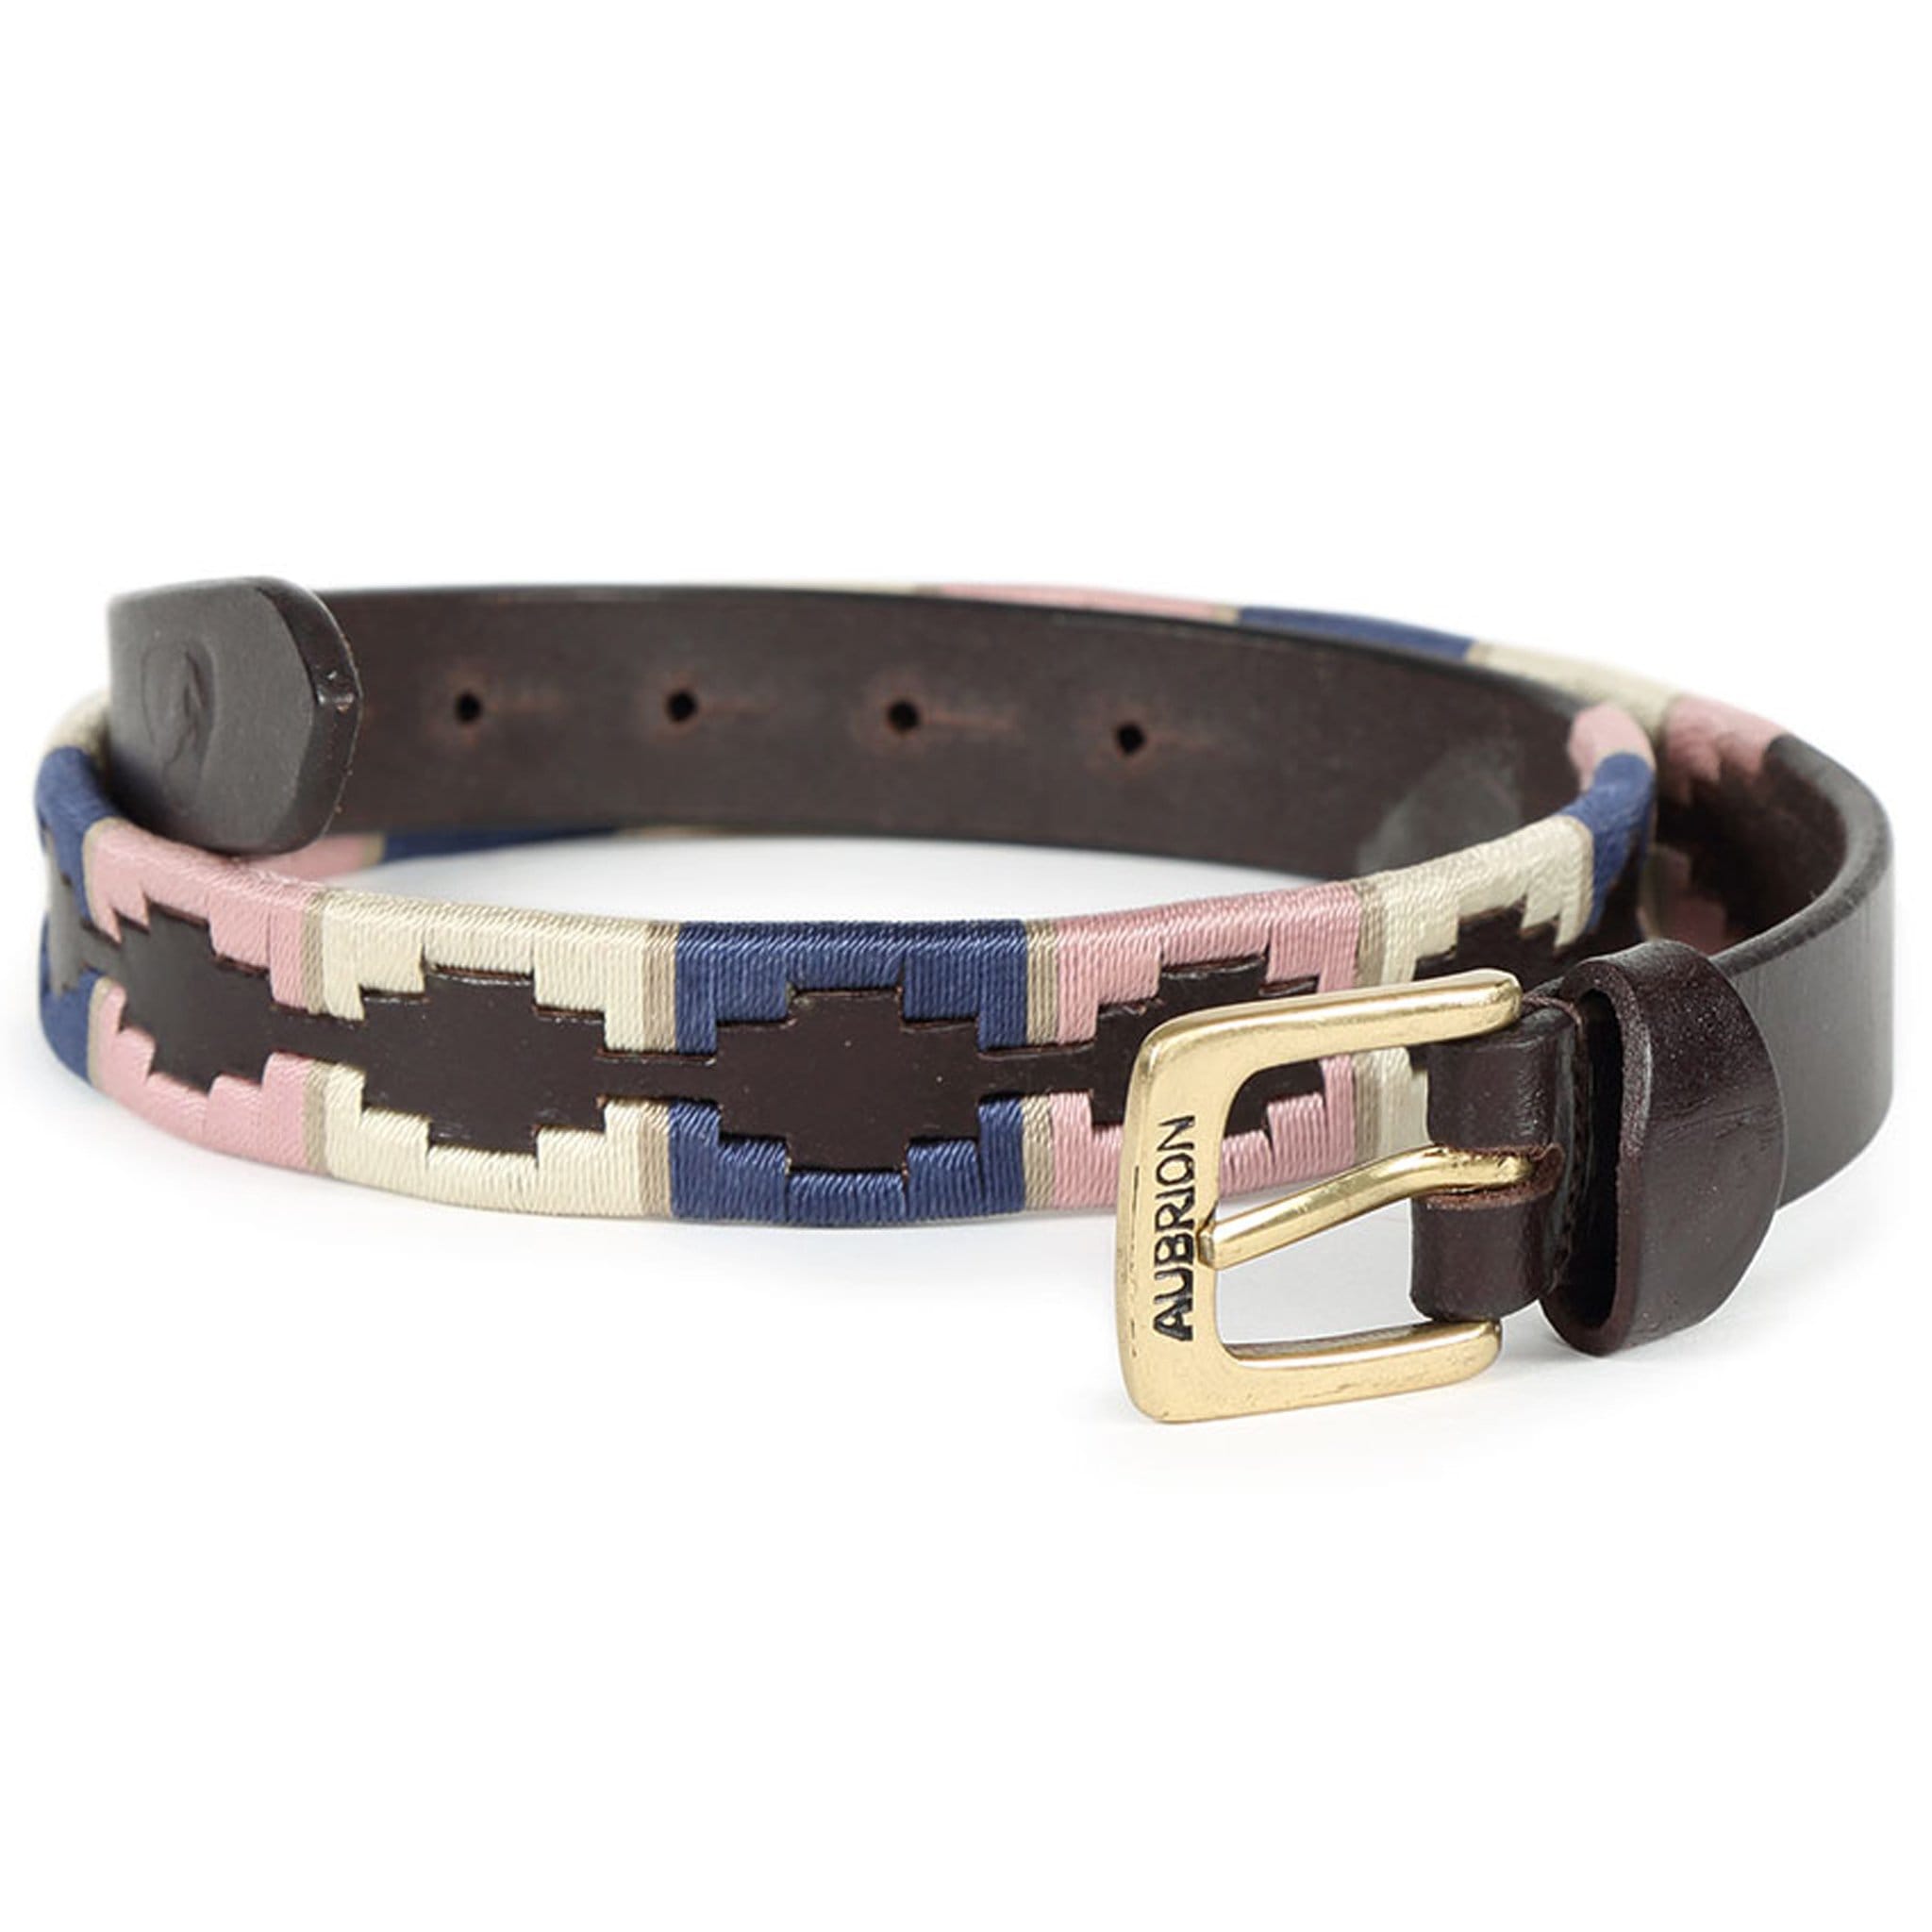 Shires Aubrion Drover Polo Belt Navy/Pink/Natural 9969.